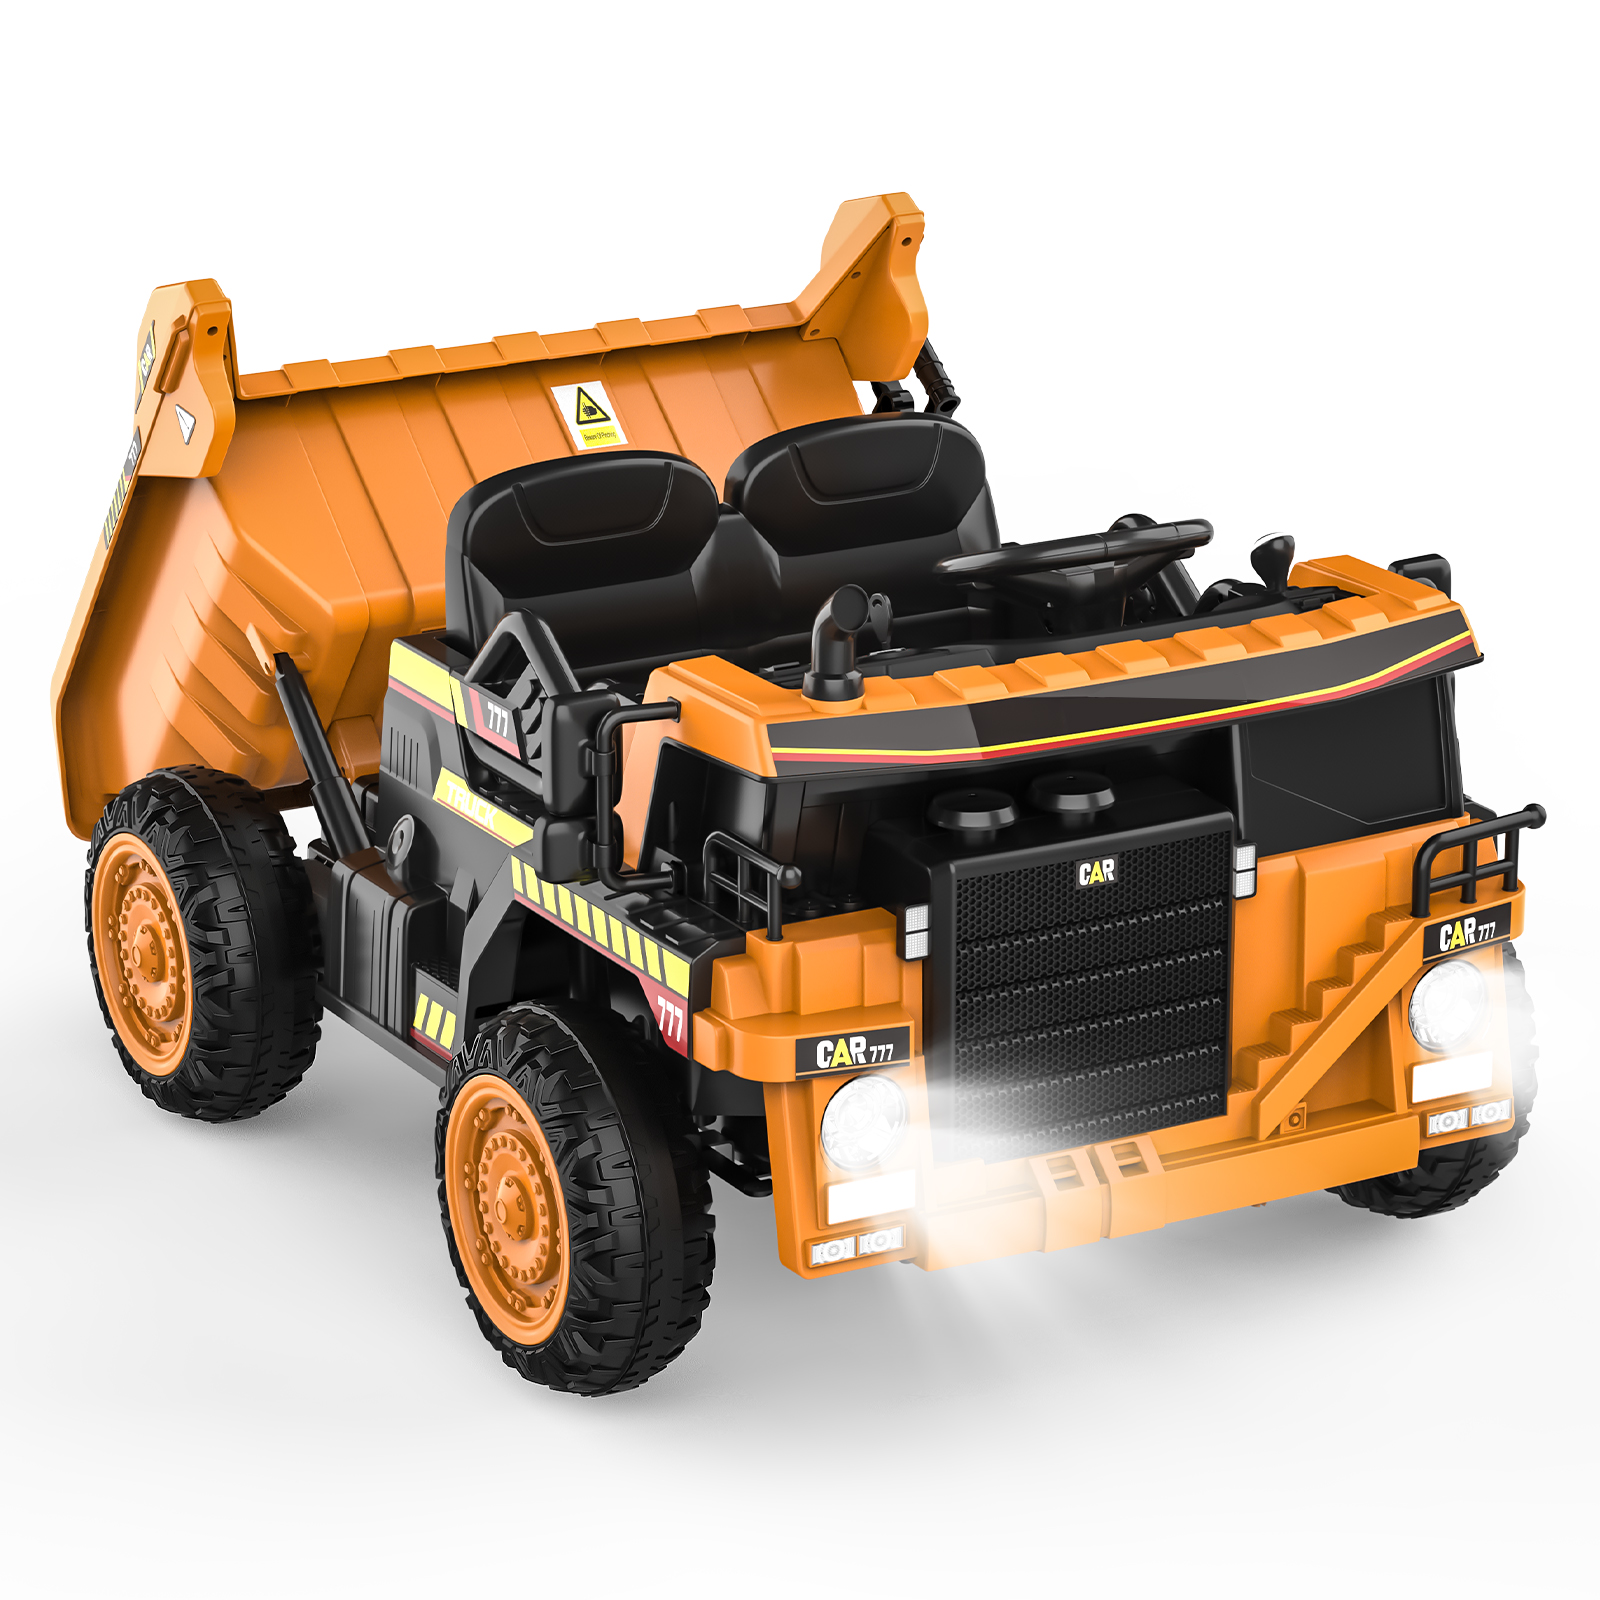 TOKTOO 12V Battery Powered Ride-on Dump Truck with Remote Control, Music Player, Electric Dump Bucket, Kids Tractor -Ginger Yellow - image 1 of 7